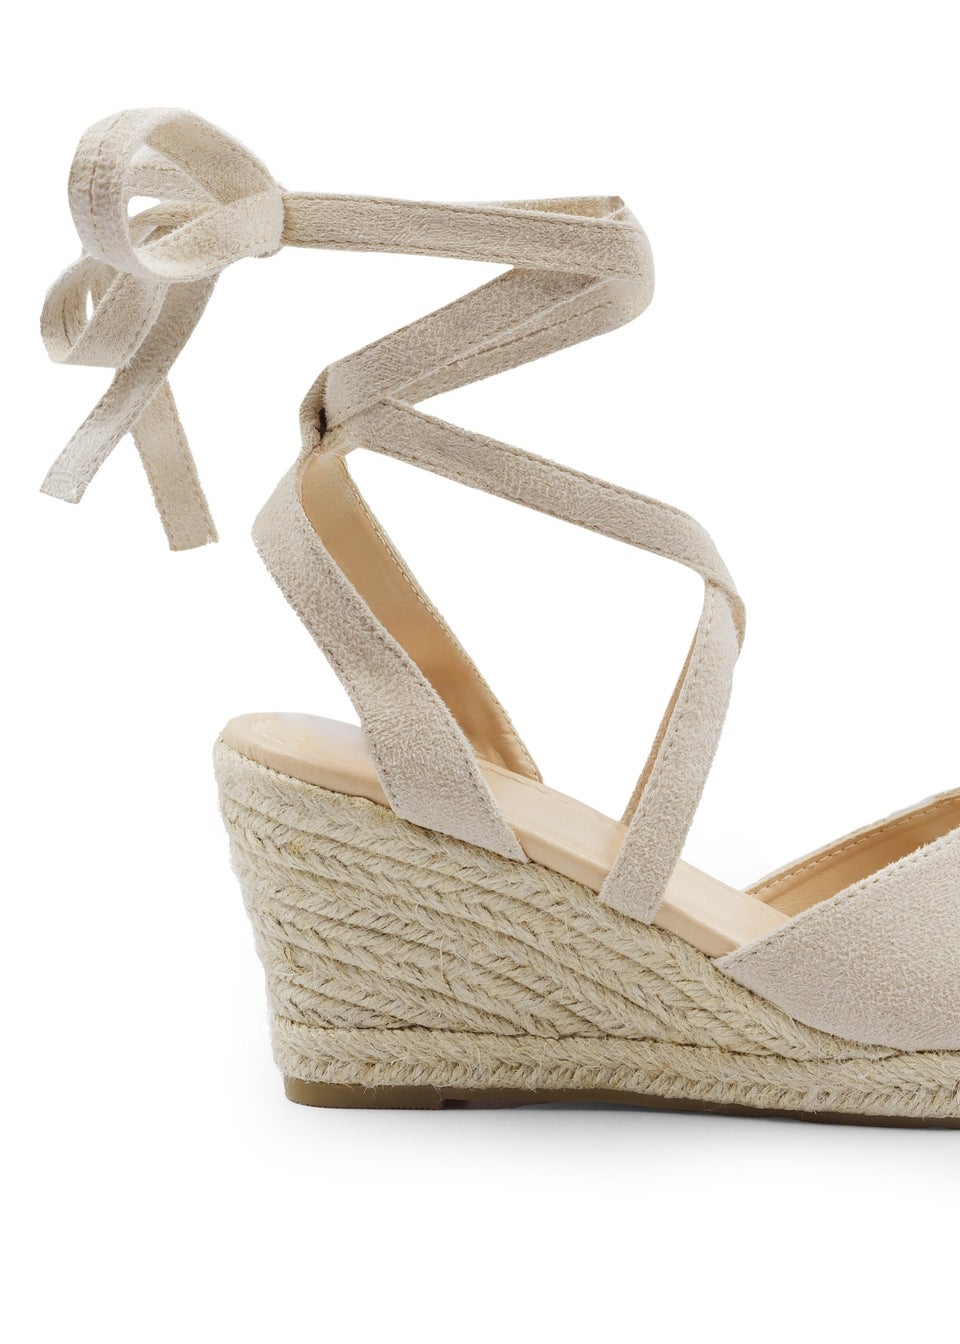 Where's That From Cream Suede Juniper Low Wedge Espadrille Sandals